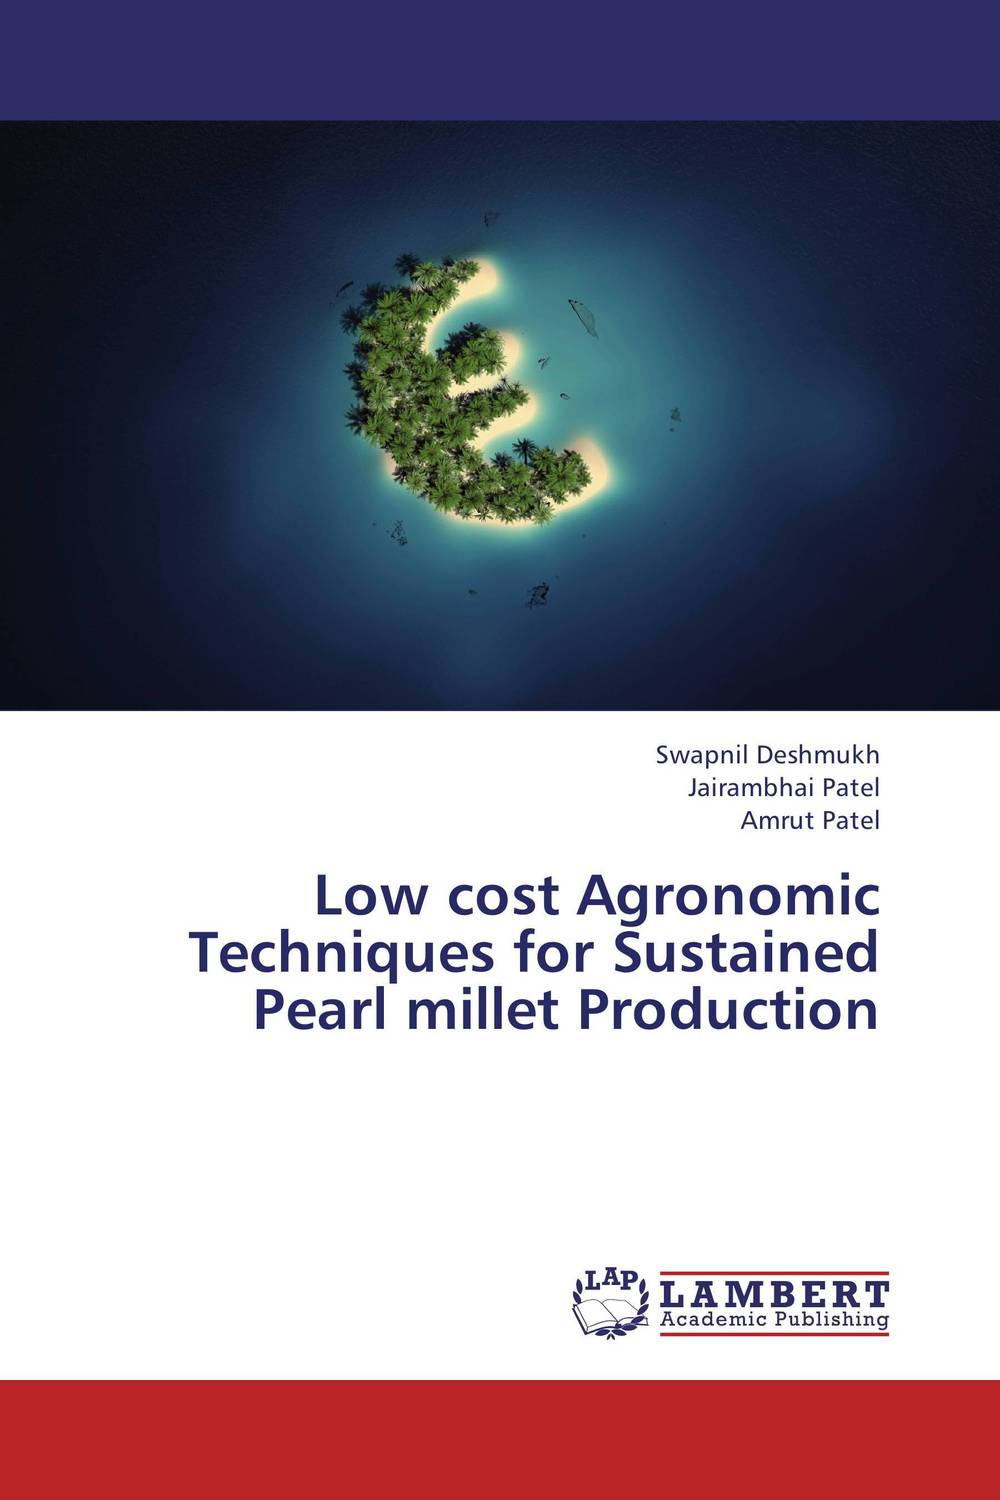 Low cost Agronomic Techniques for Sustained Pearl millet Production